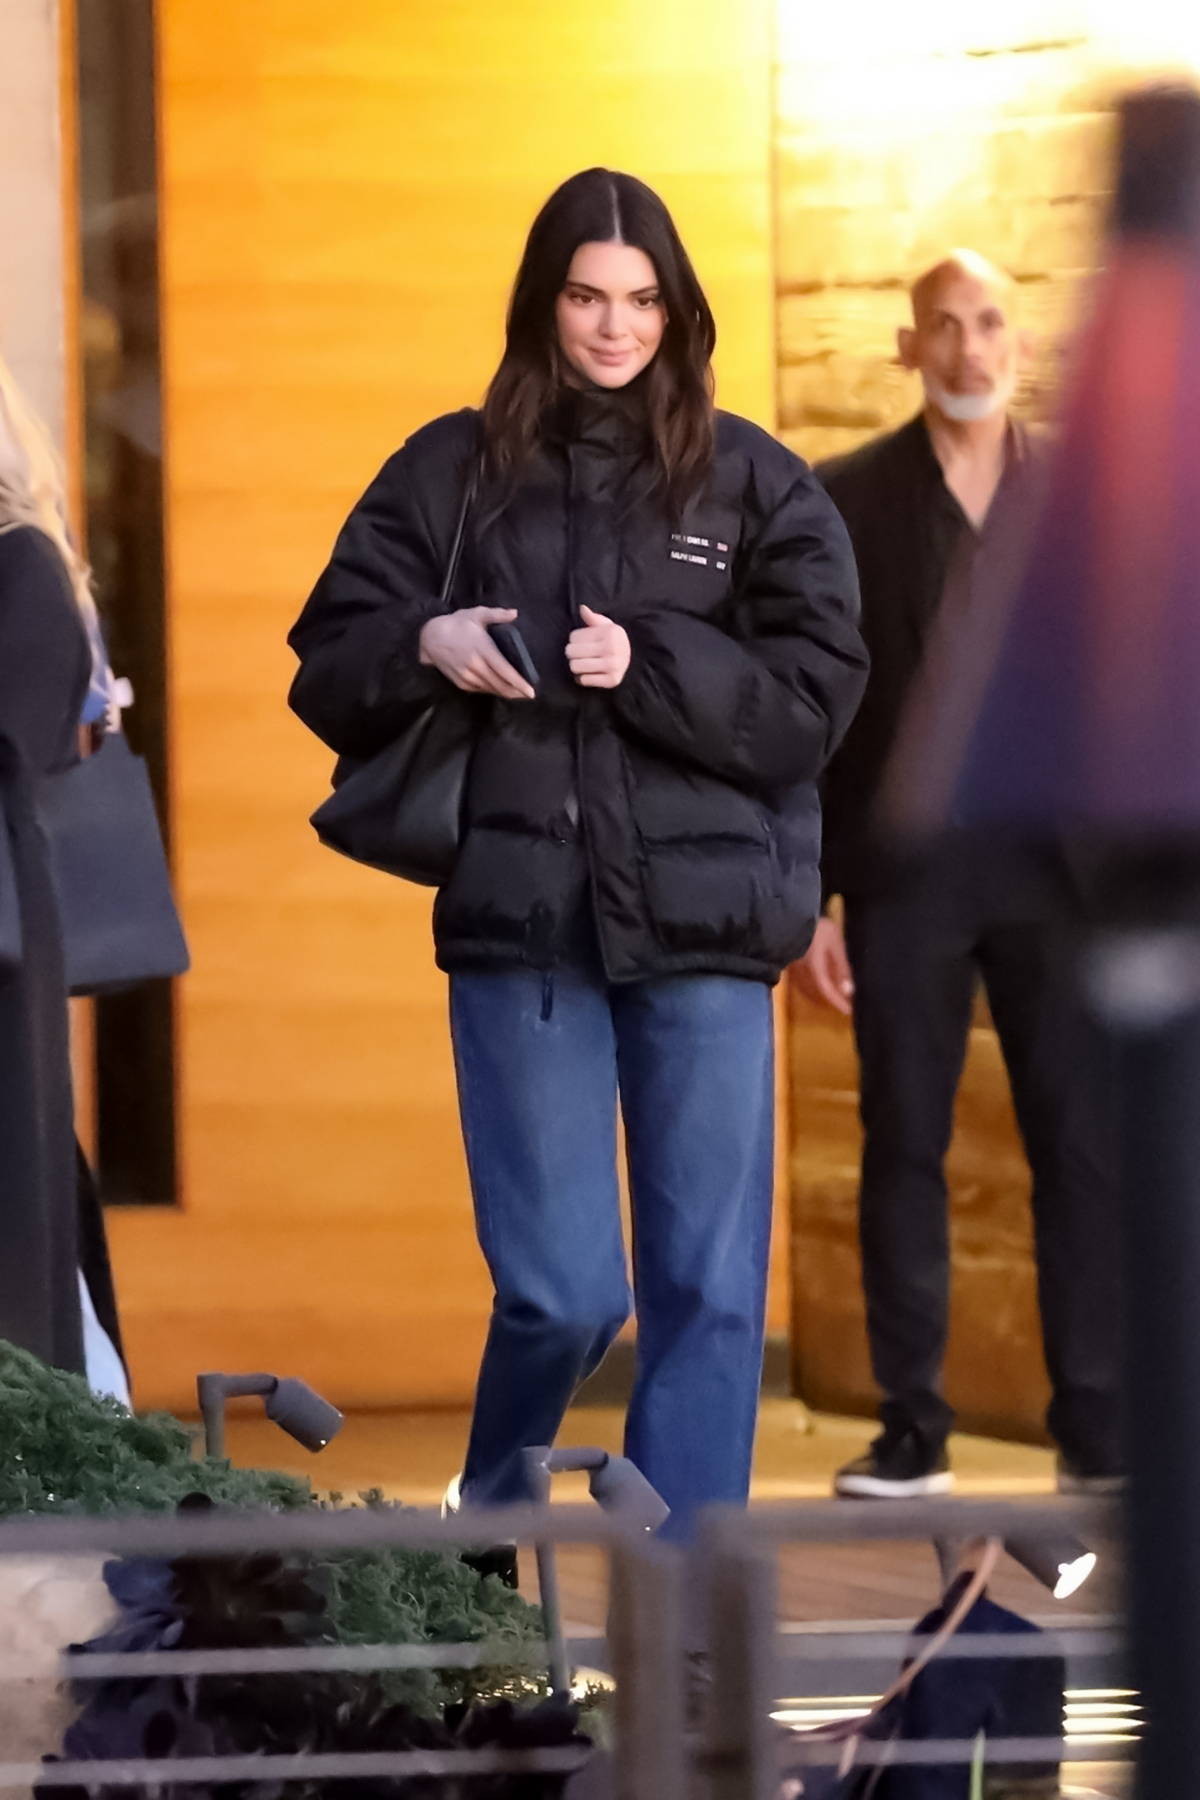 Kendall Jenner Wears A Puffy Jacket And Blue Jeans For Dinner With Friends At Nobu In Malibu